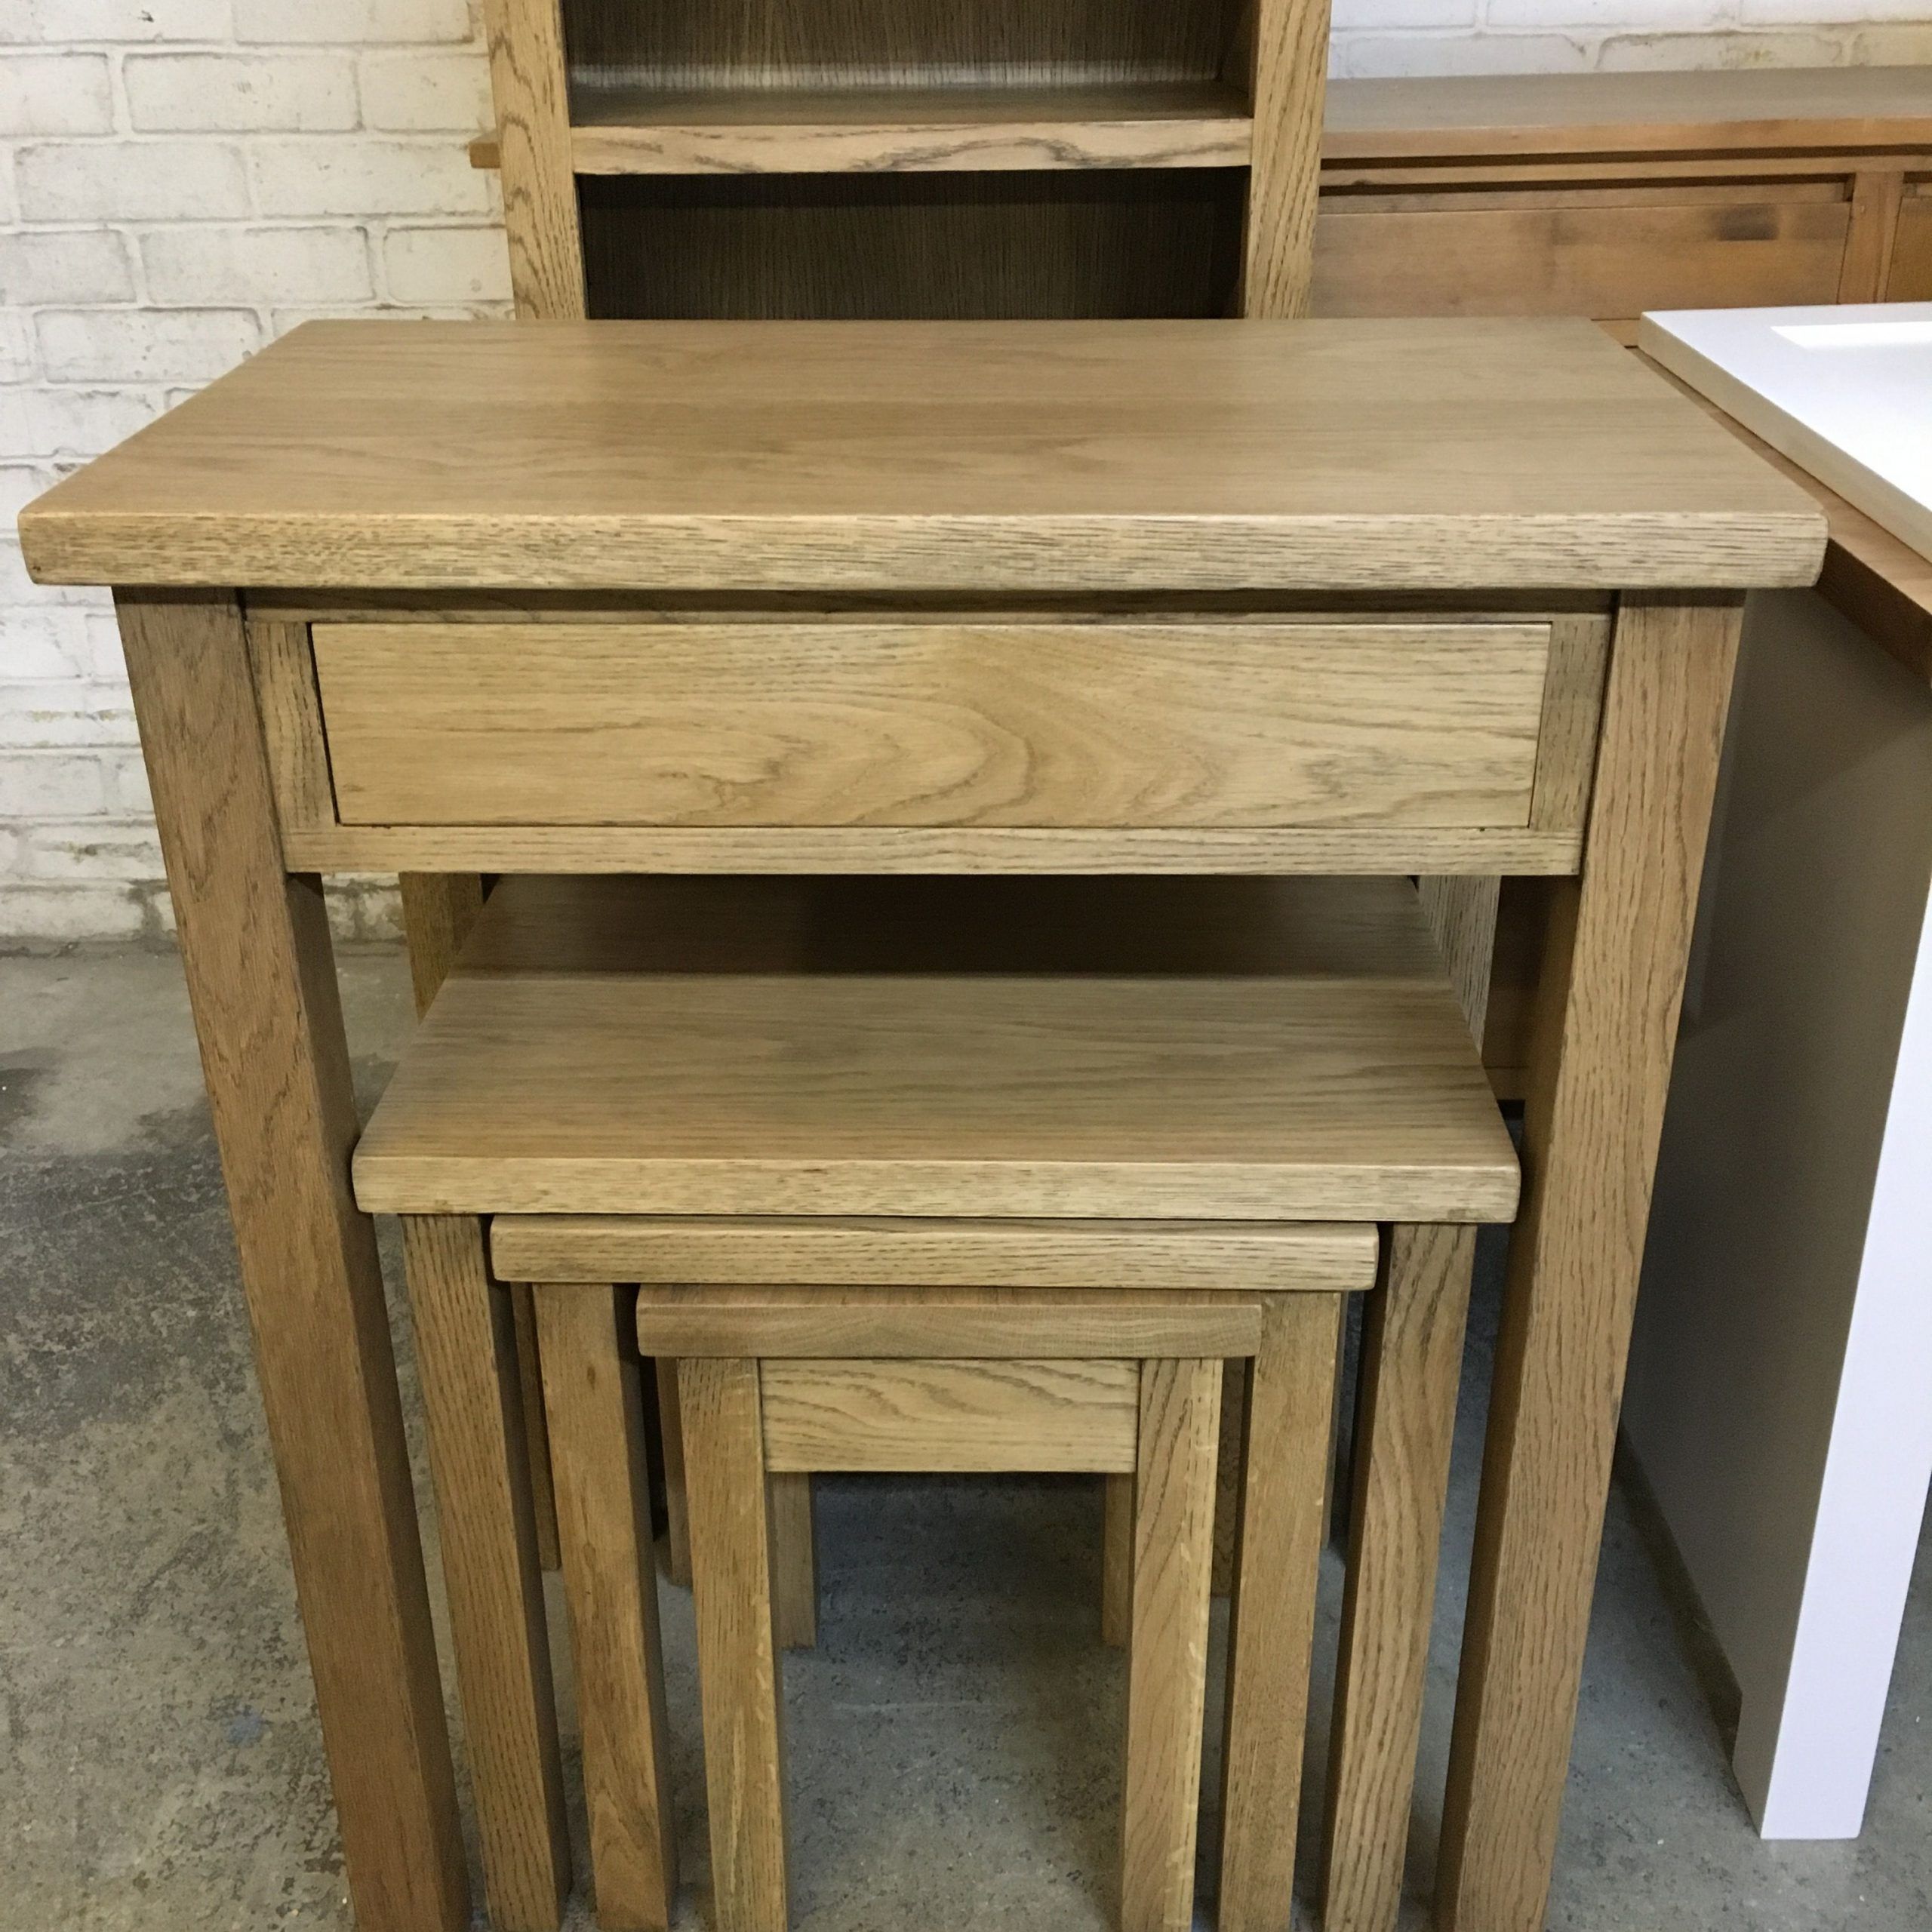 Oak Console Table With A Nest Of Tables Made To Fit Inside Inside Nesting Console Tables (View 14 of 20)